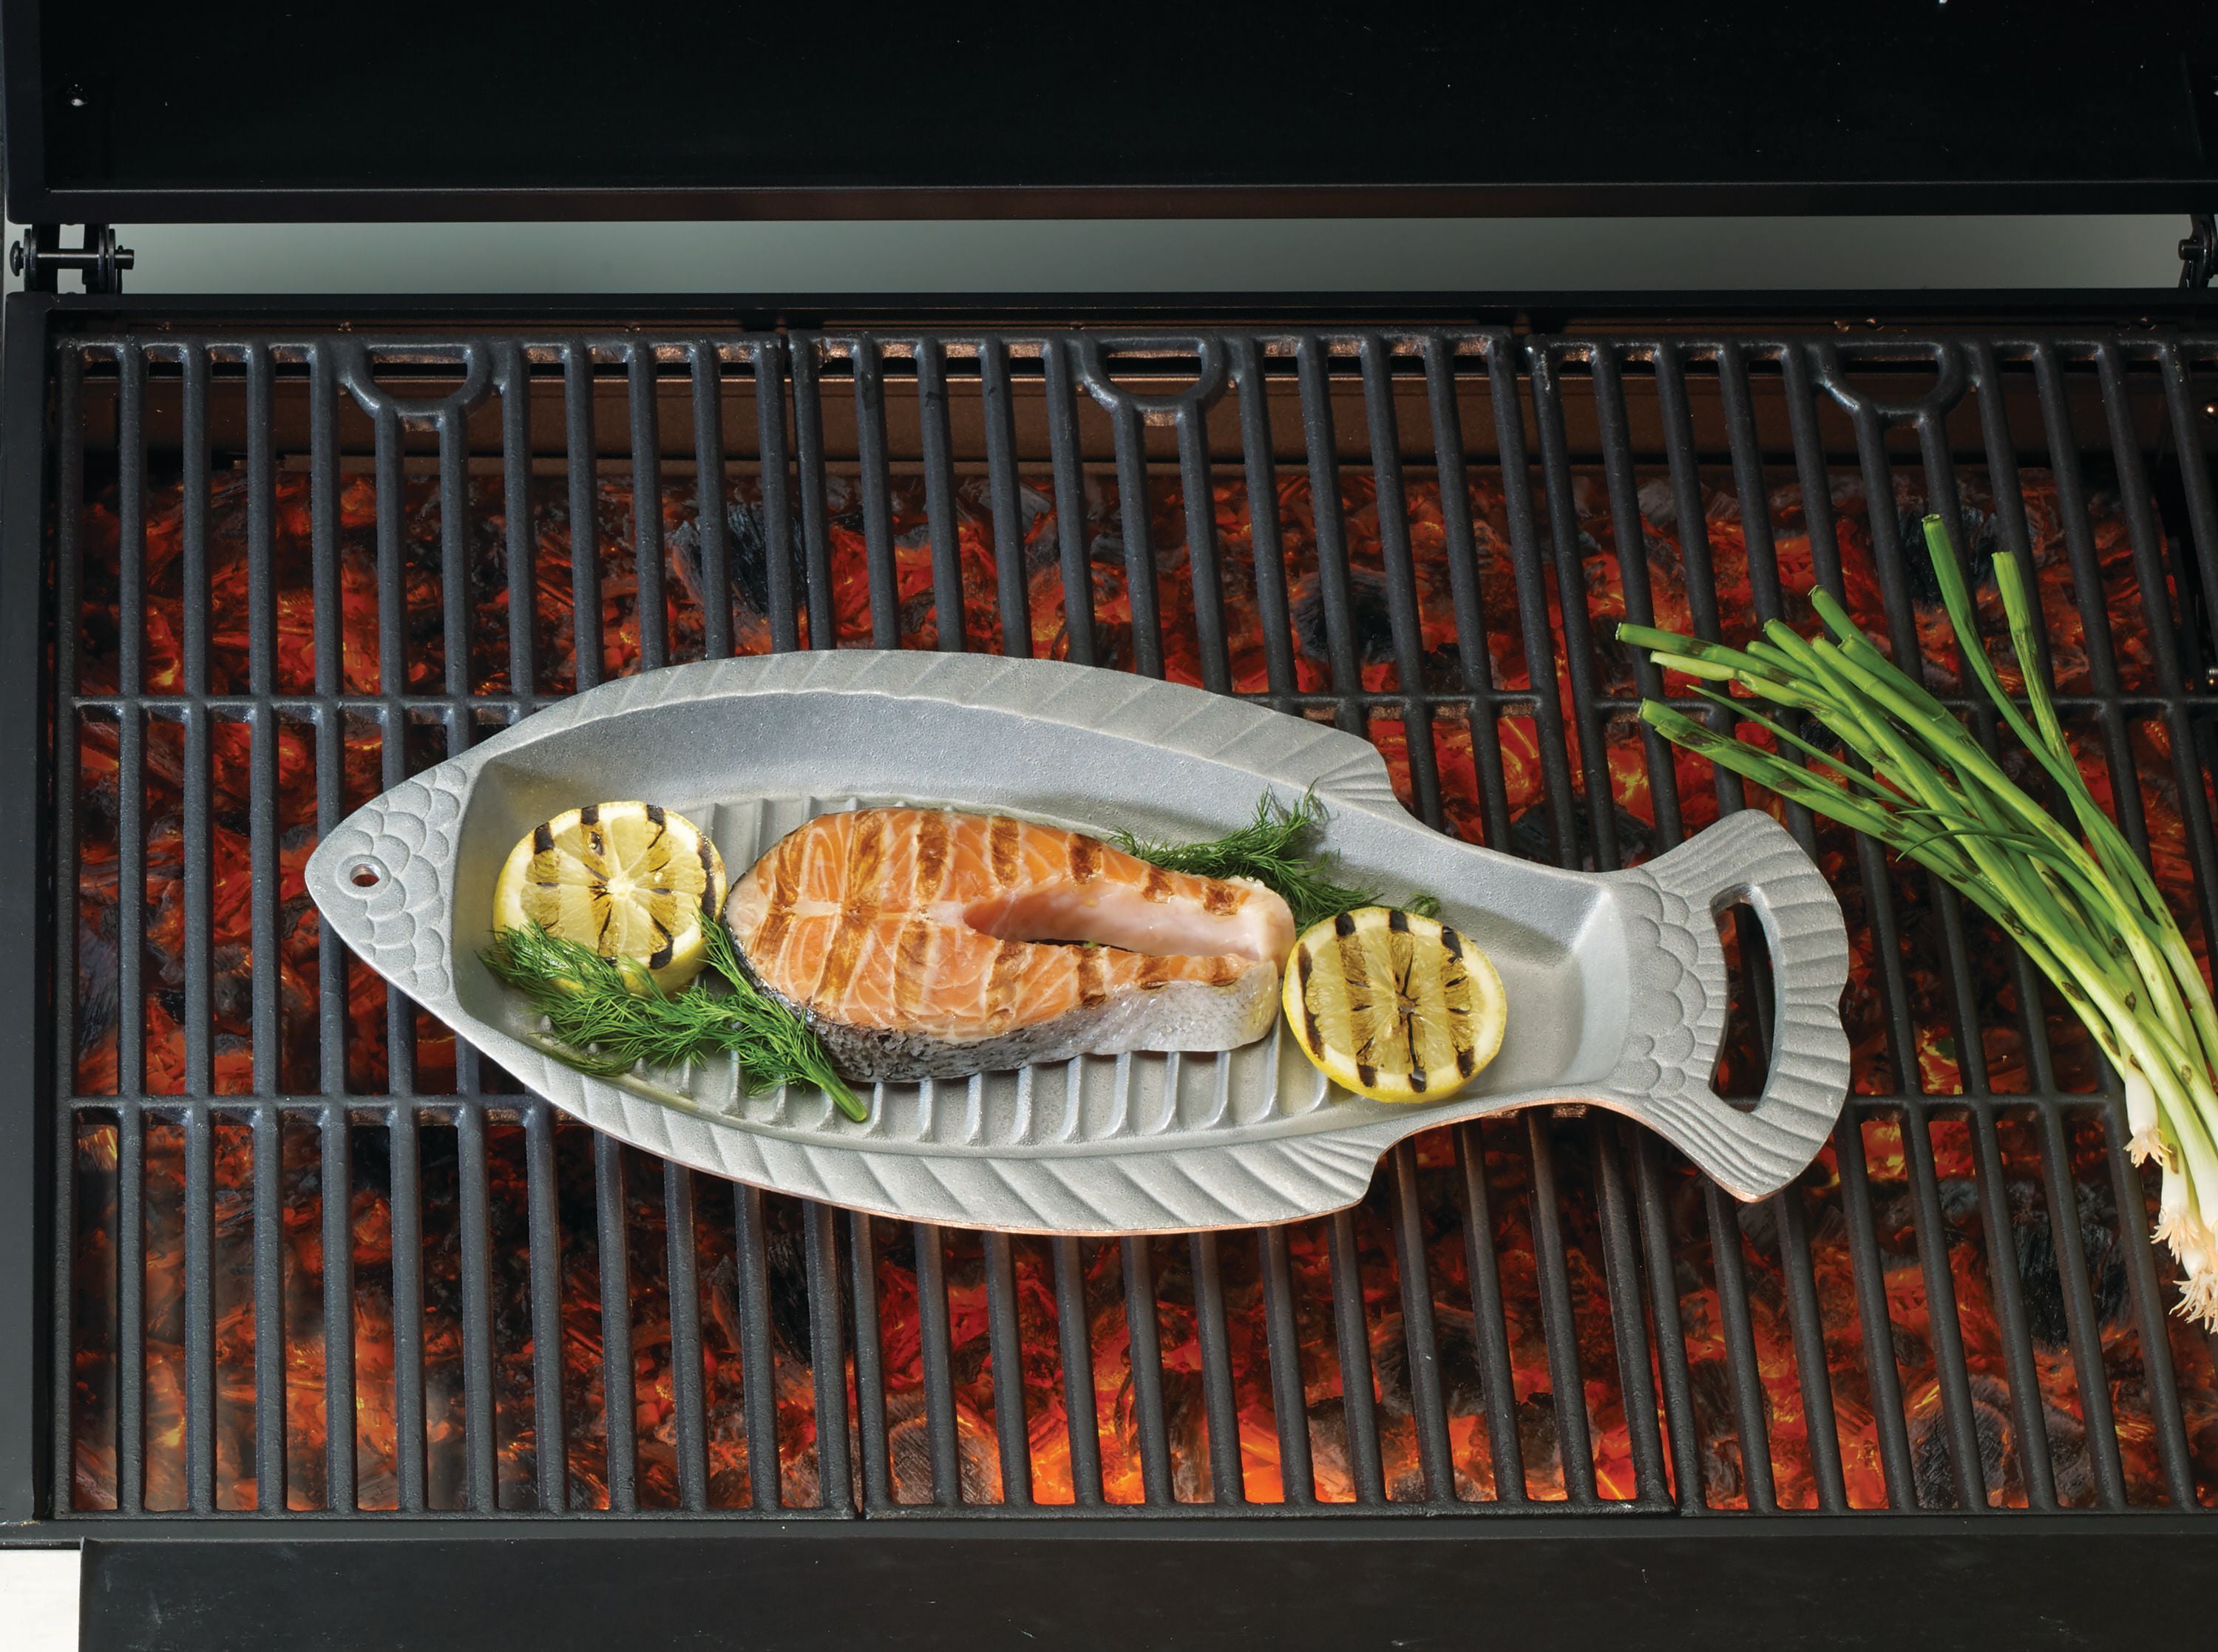 18.25-Inch Wilton Armetale Gourmet Grillware Grilling Pan with Handles 